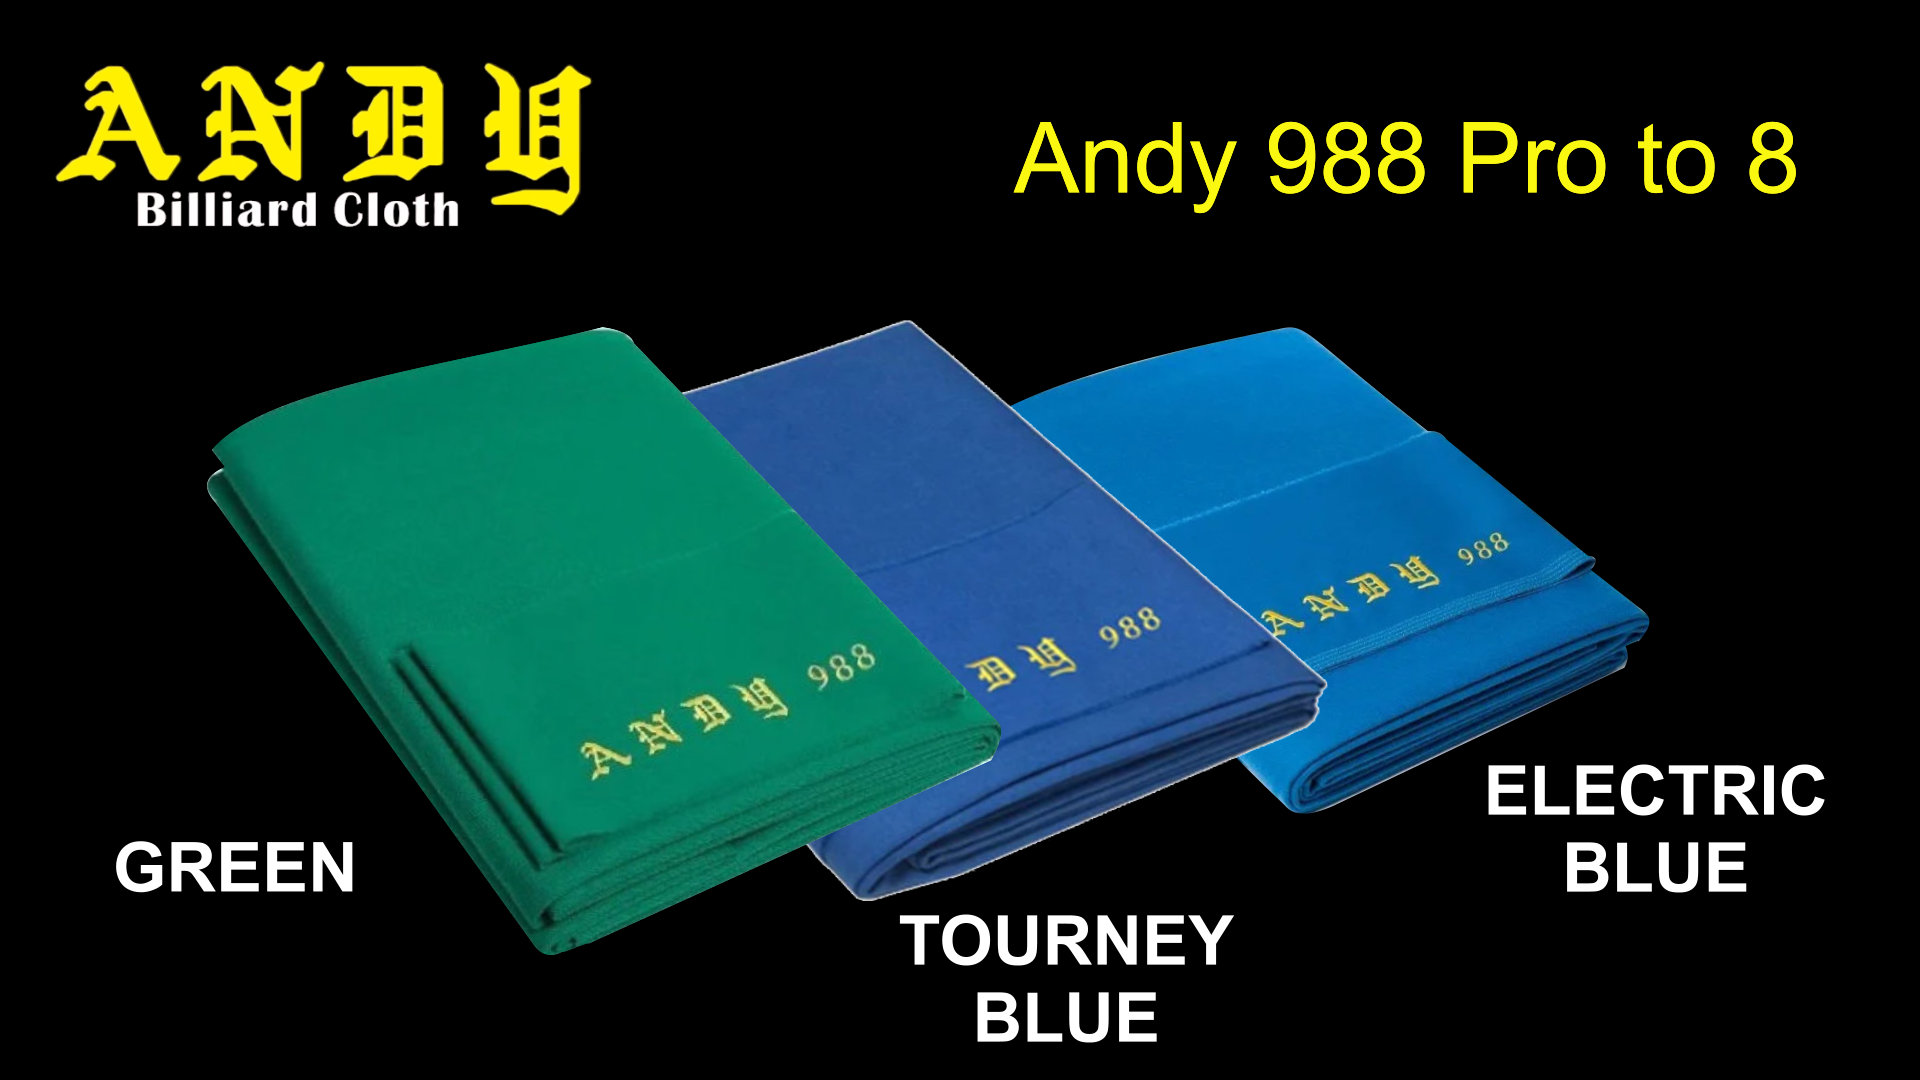 andy 988 pro to 8